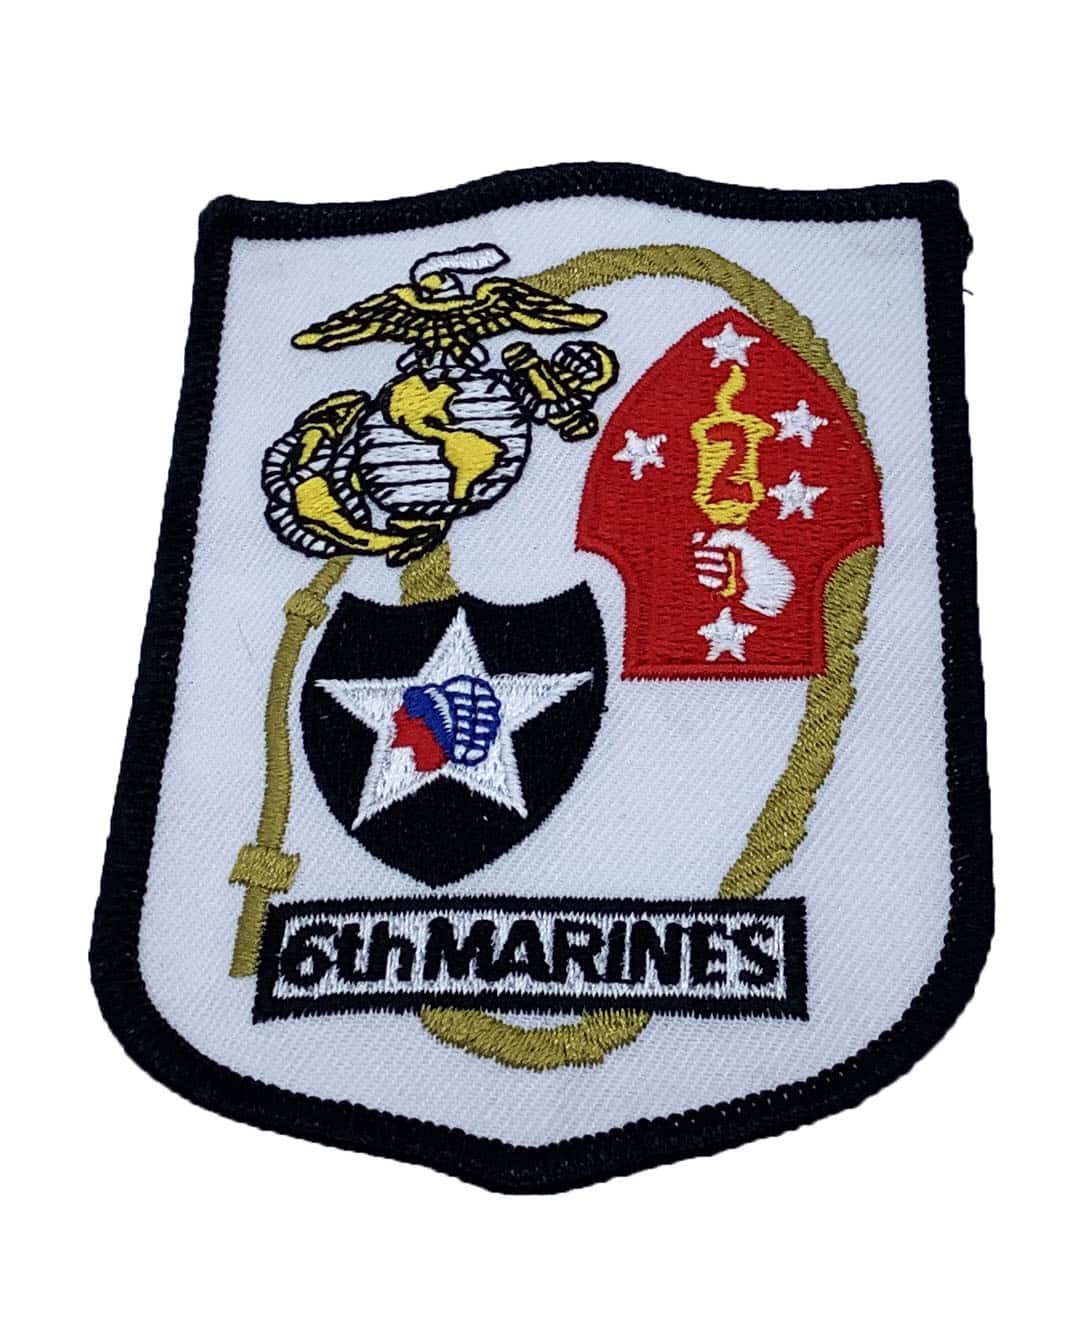 6th Marines Patch – No Hook and Loop